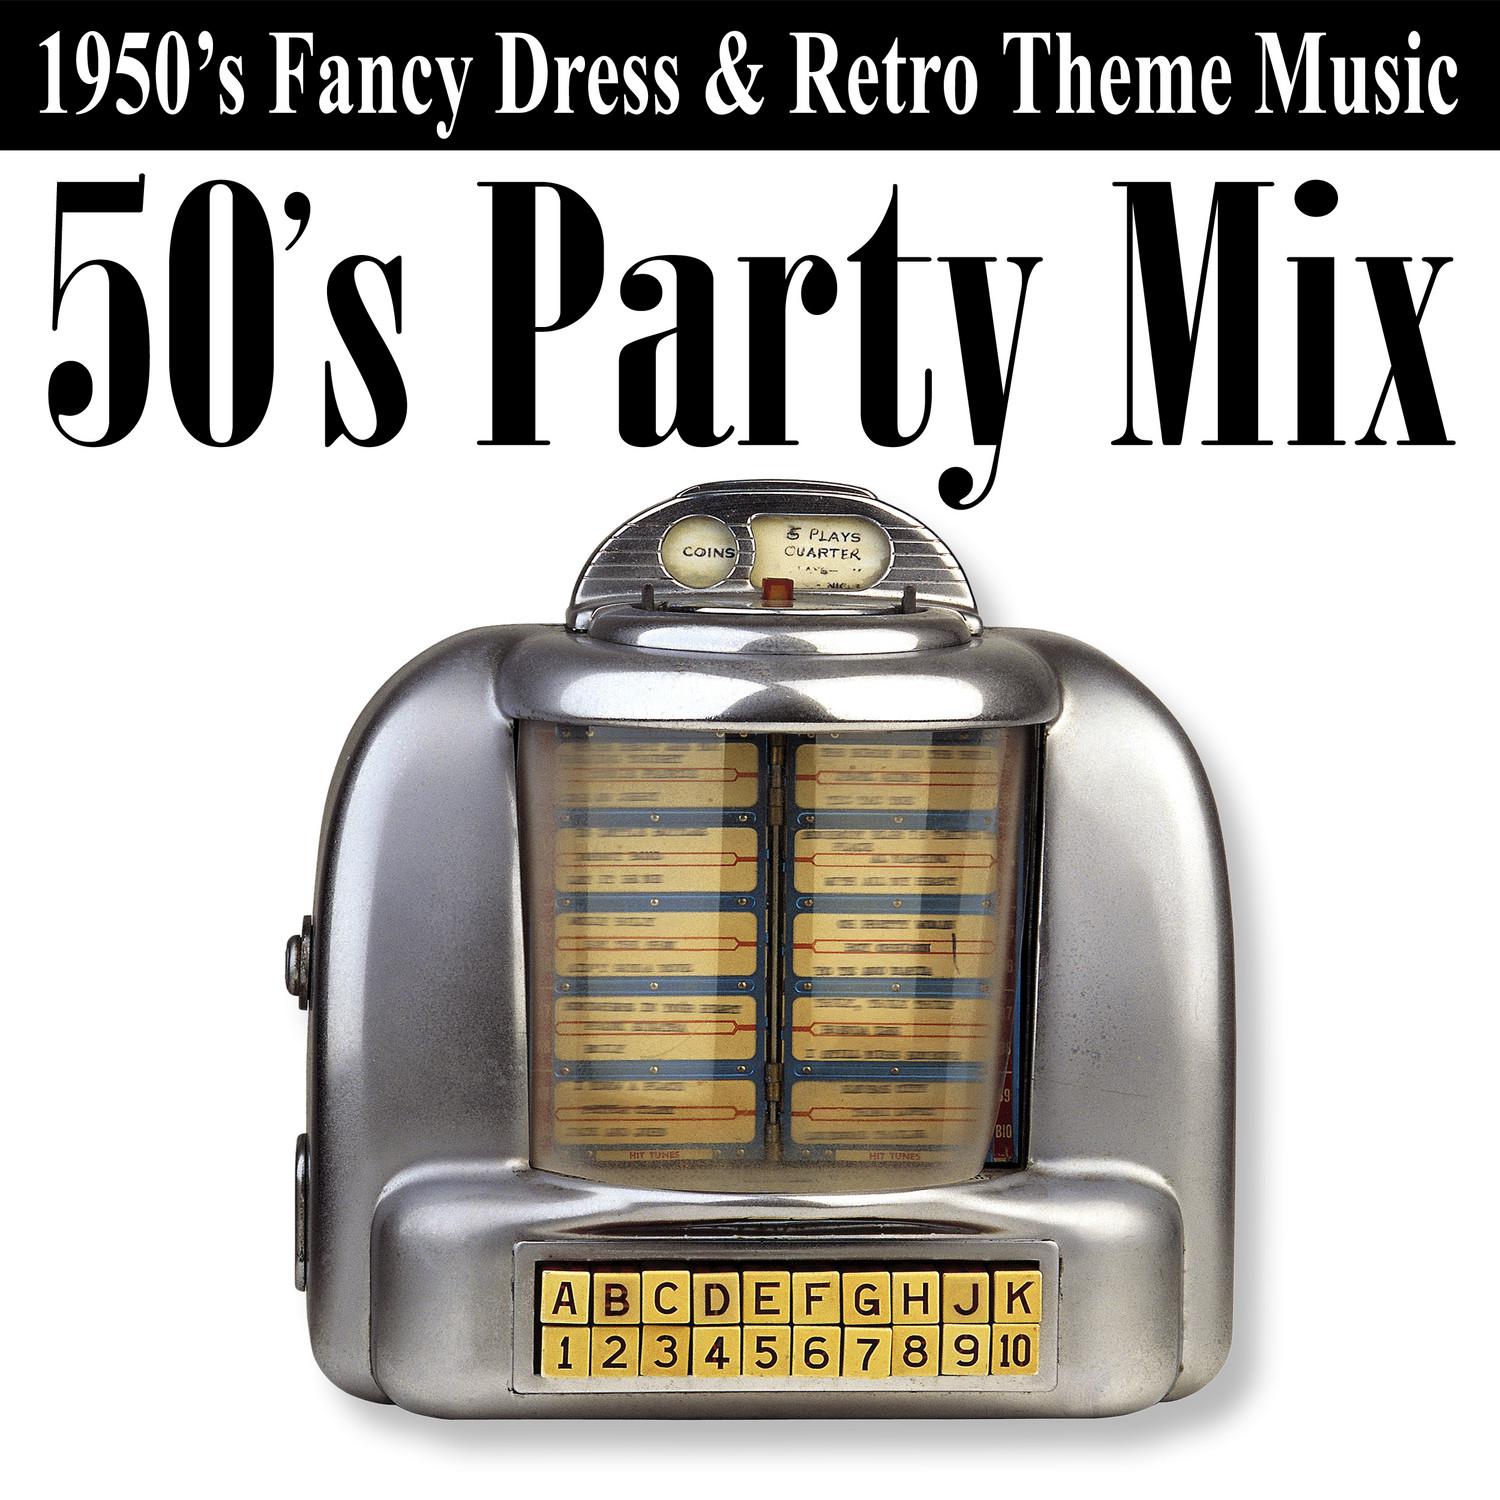 Catch a Falling Star (50's Party Mix)